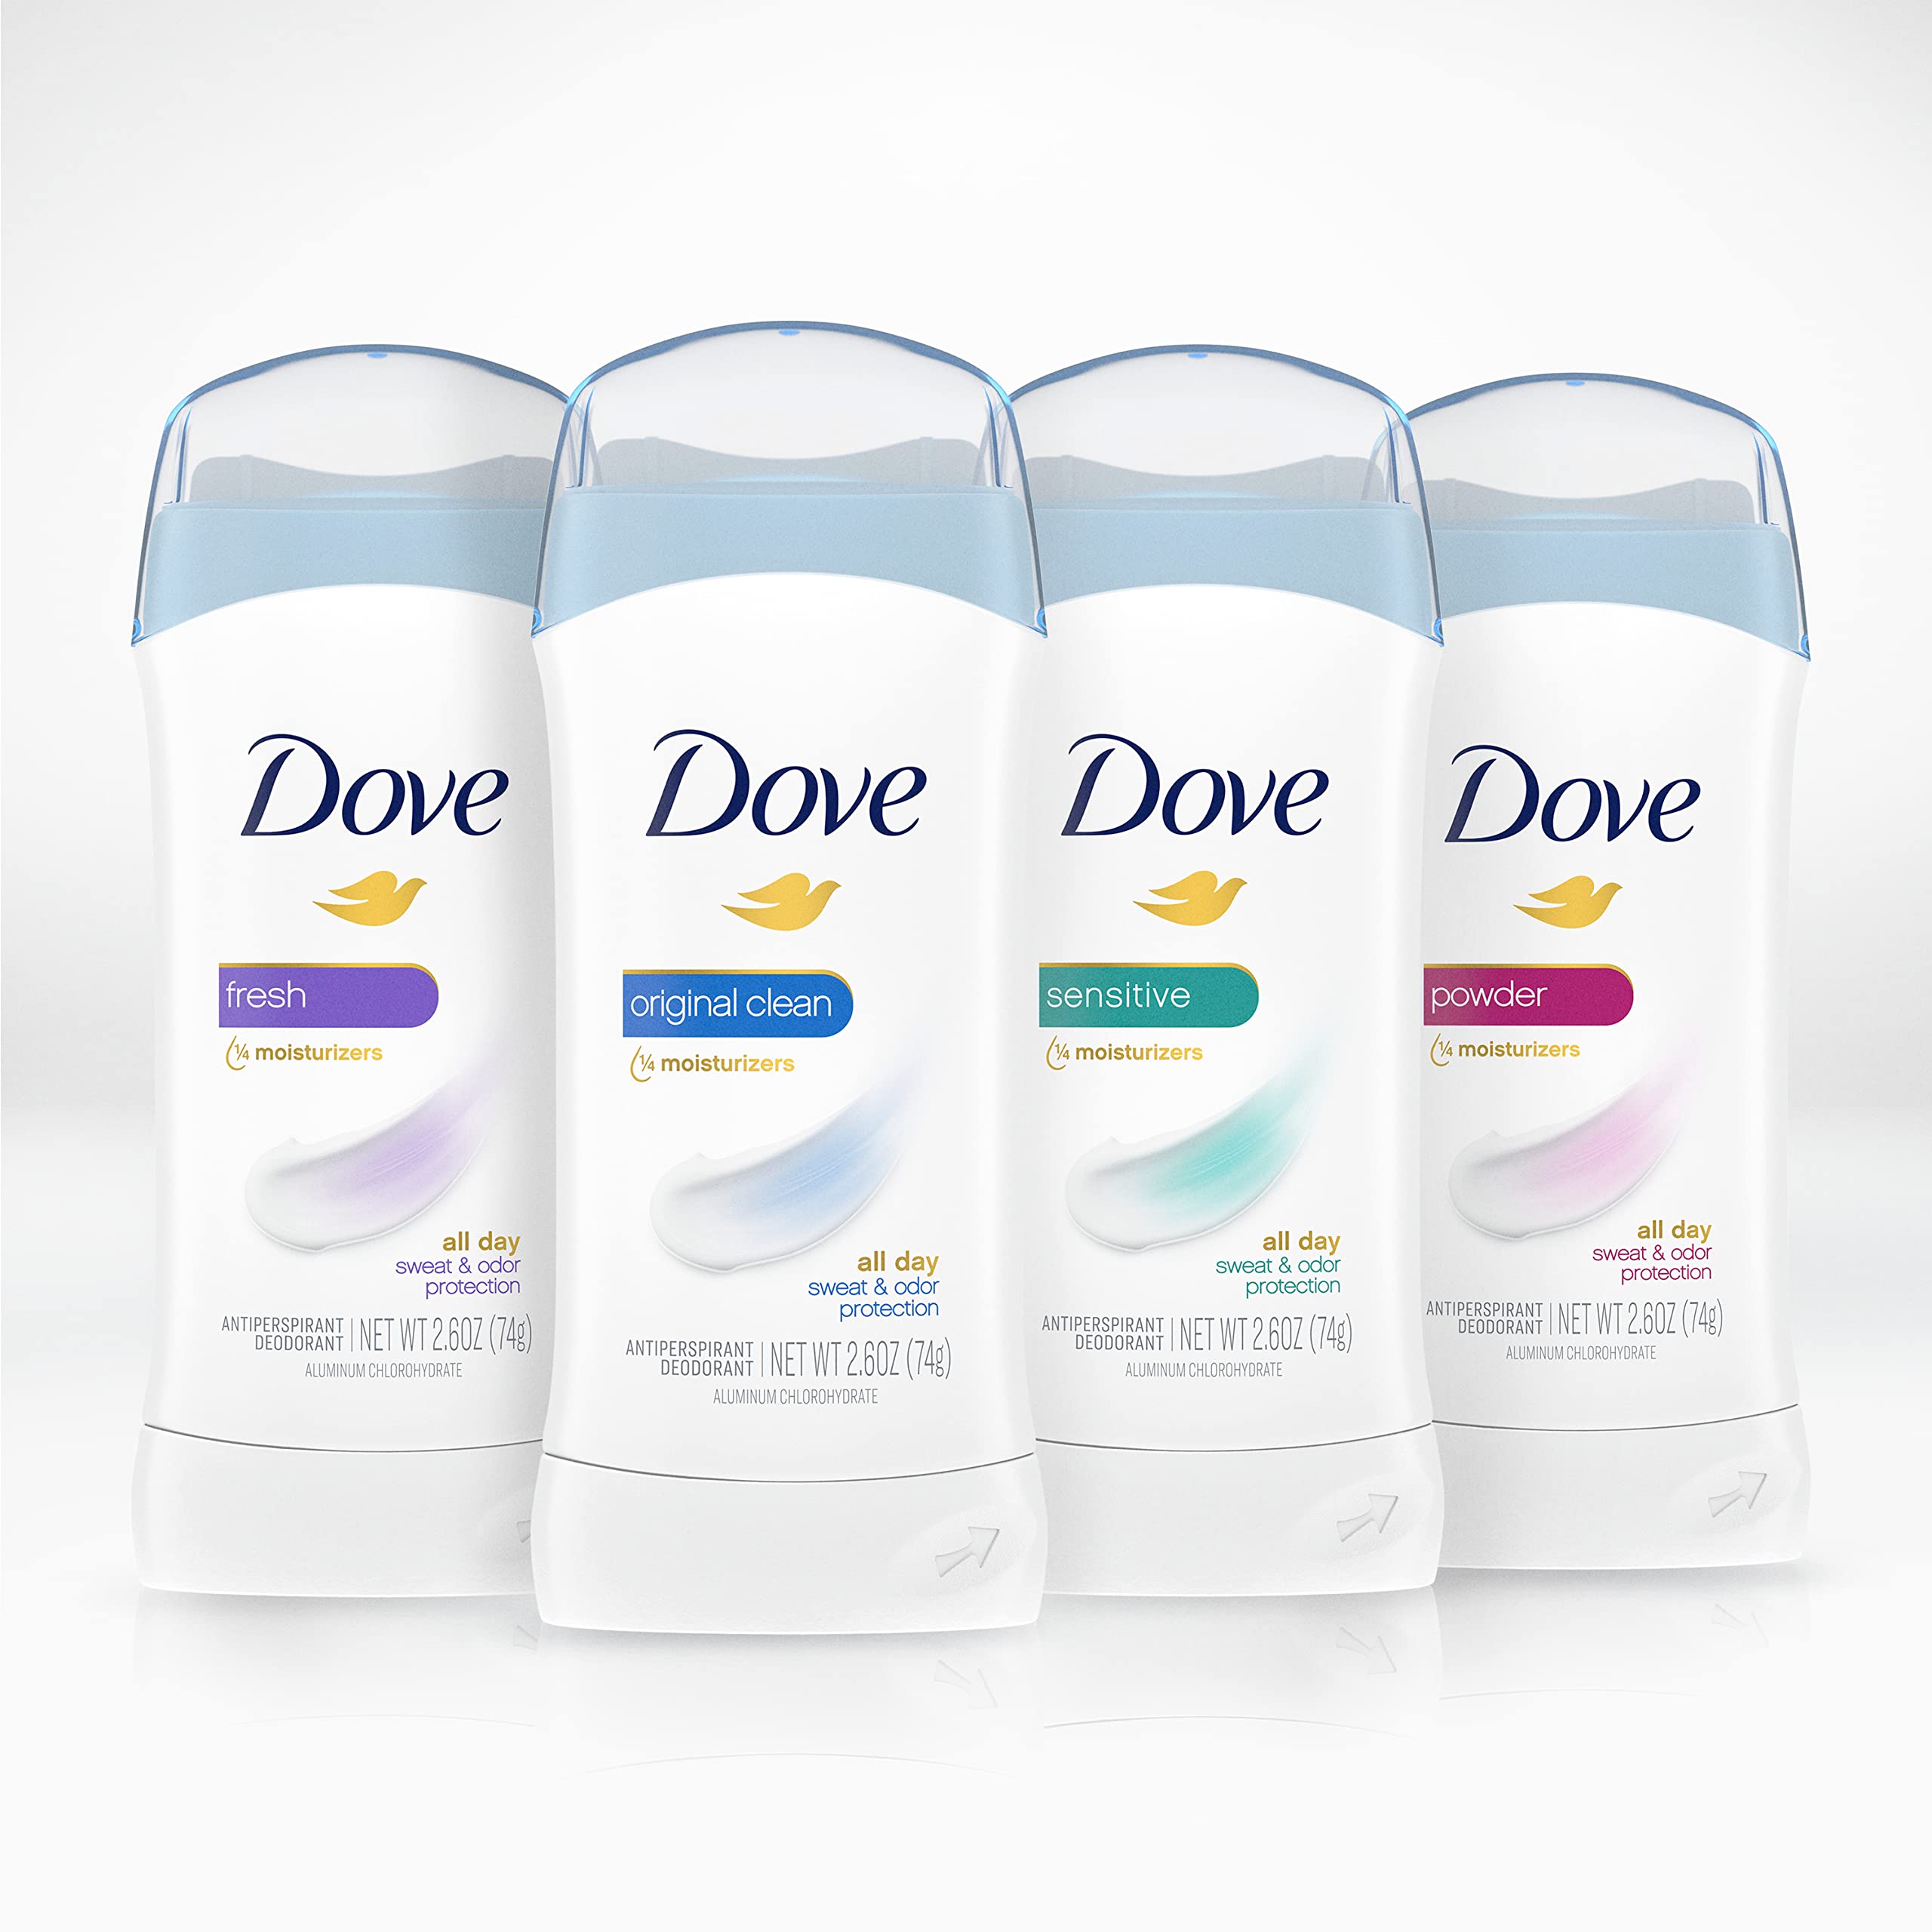 Dove Invisible Solid Antiperspirant Deodorant Stick for Women, Original Clean, For All Day Underarm Sweat & Odor Protection 2.6 oz